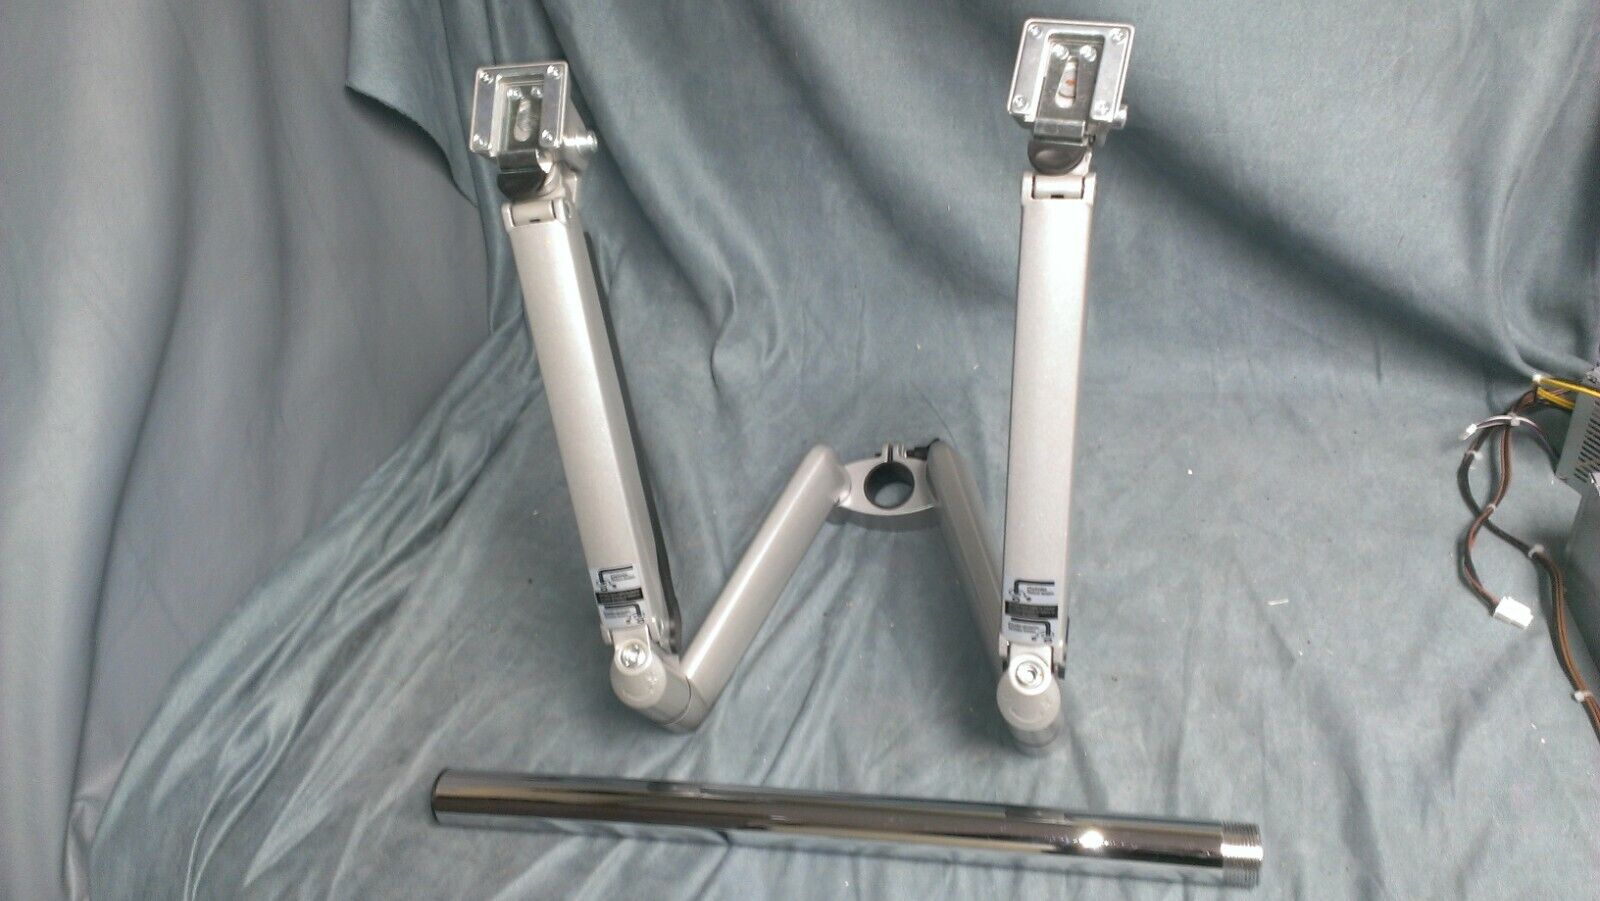 KNOLL SAPPER DUAL MONITOR ARMS MOUNT 